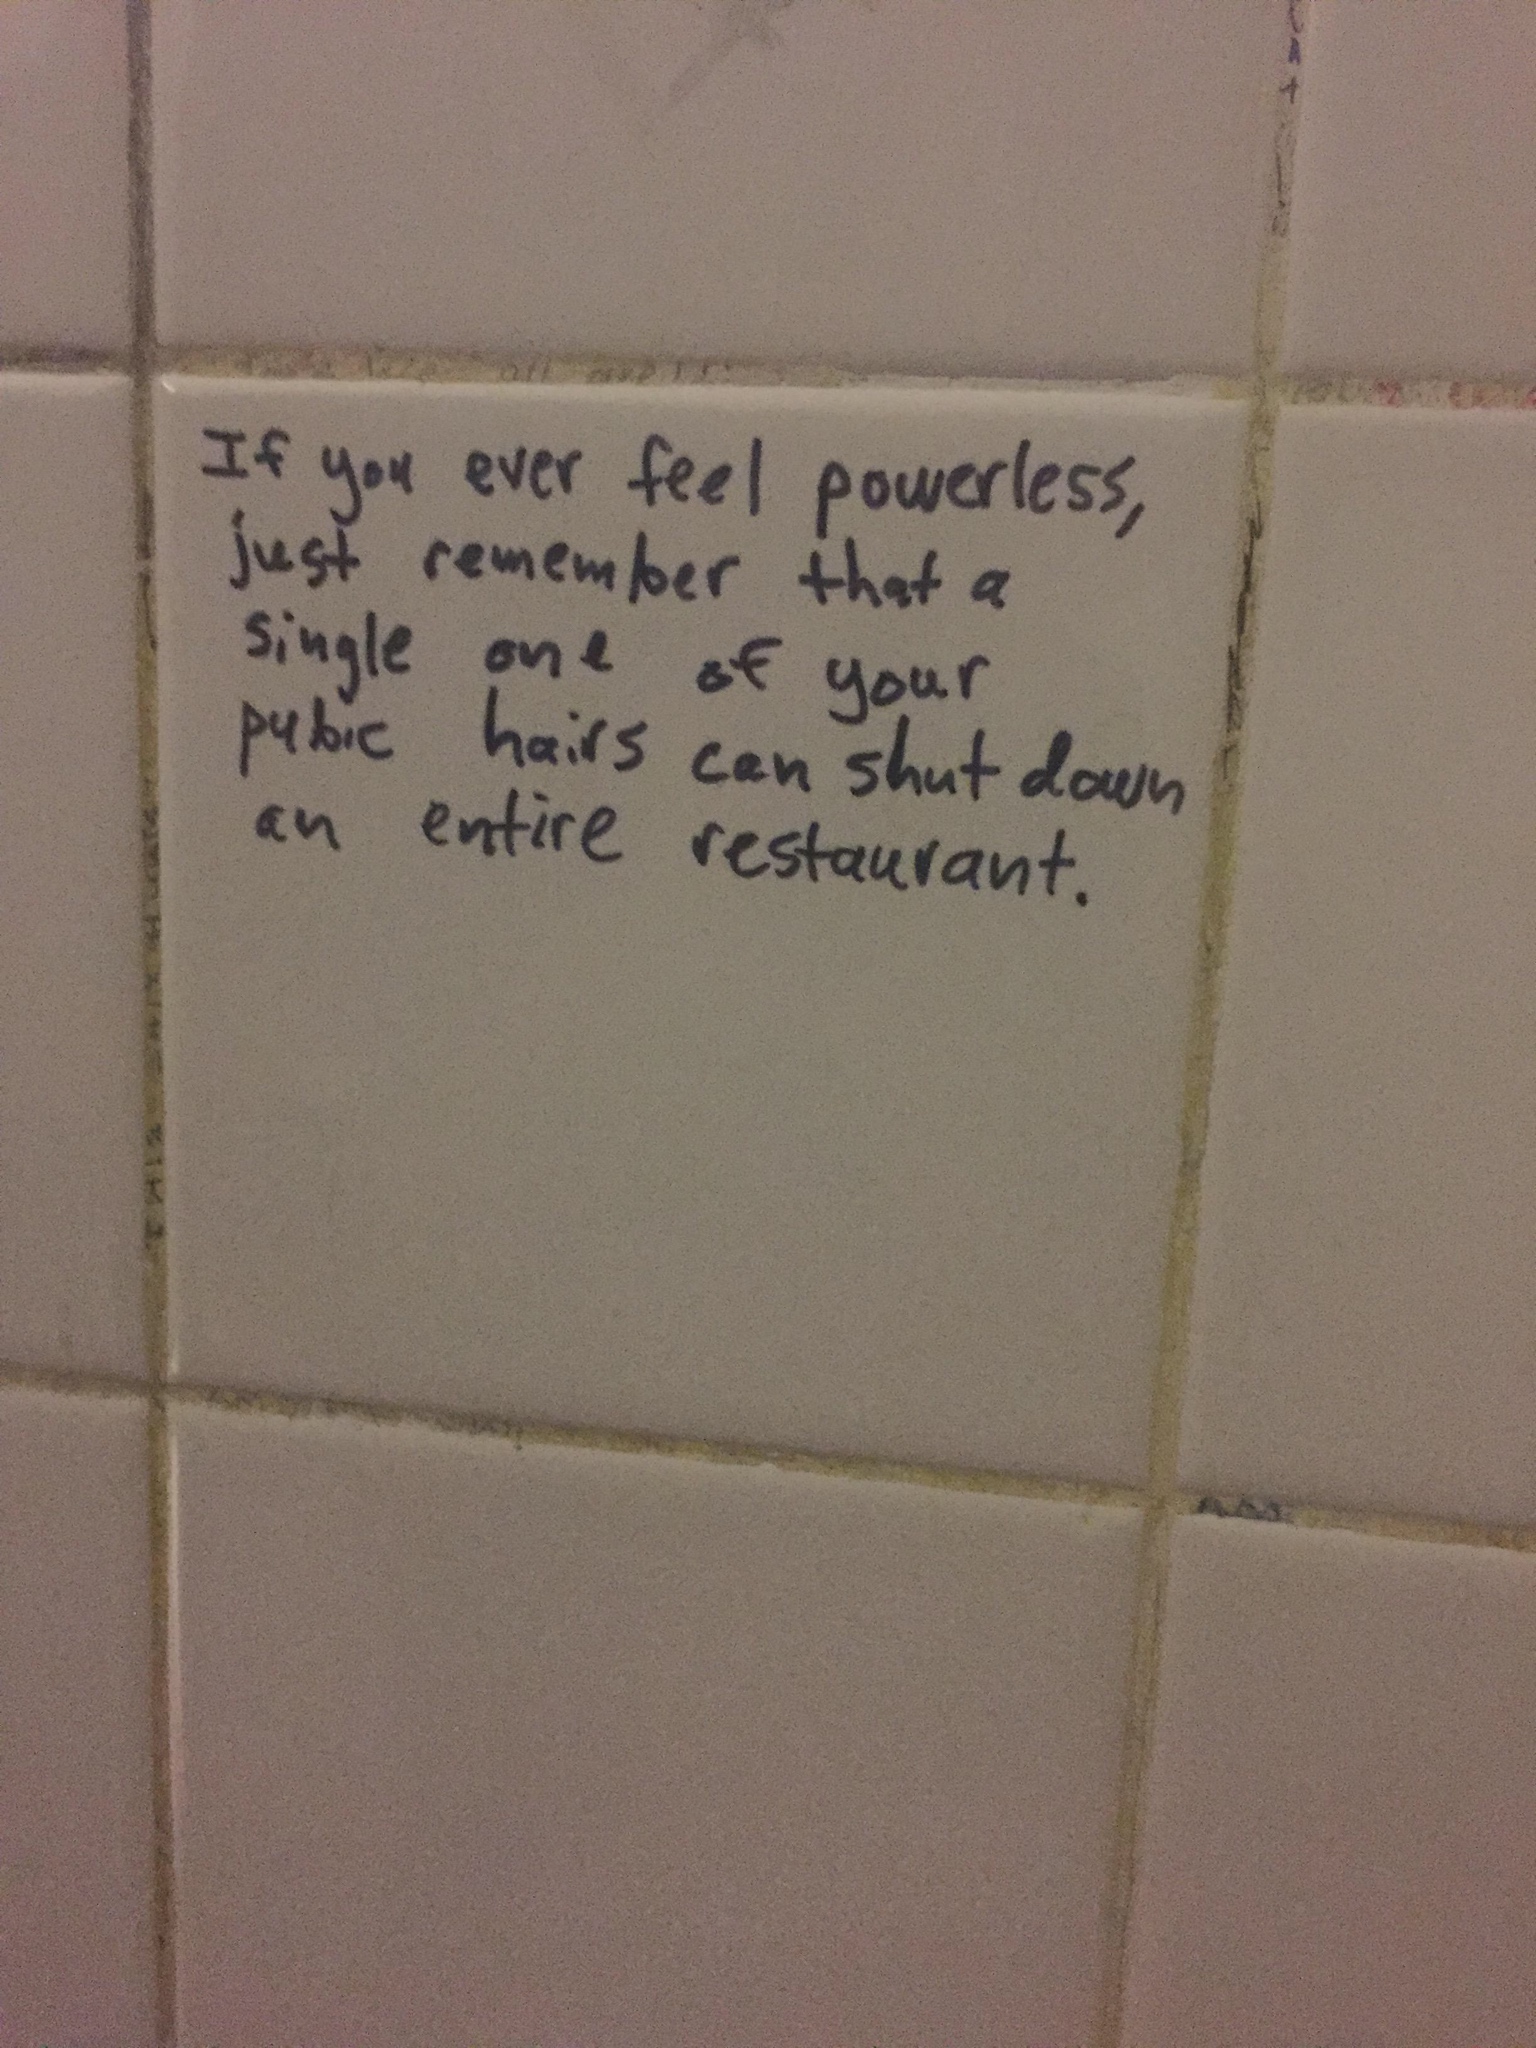 27 inspirational things written on the bathroom walls